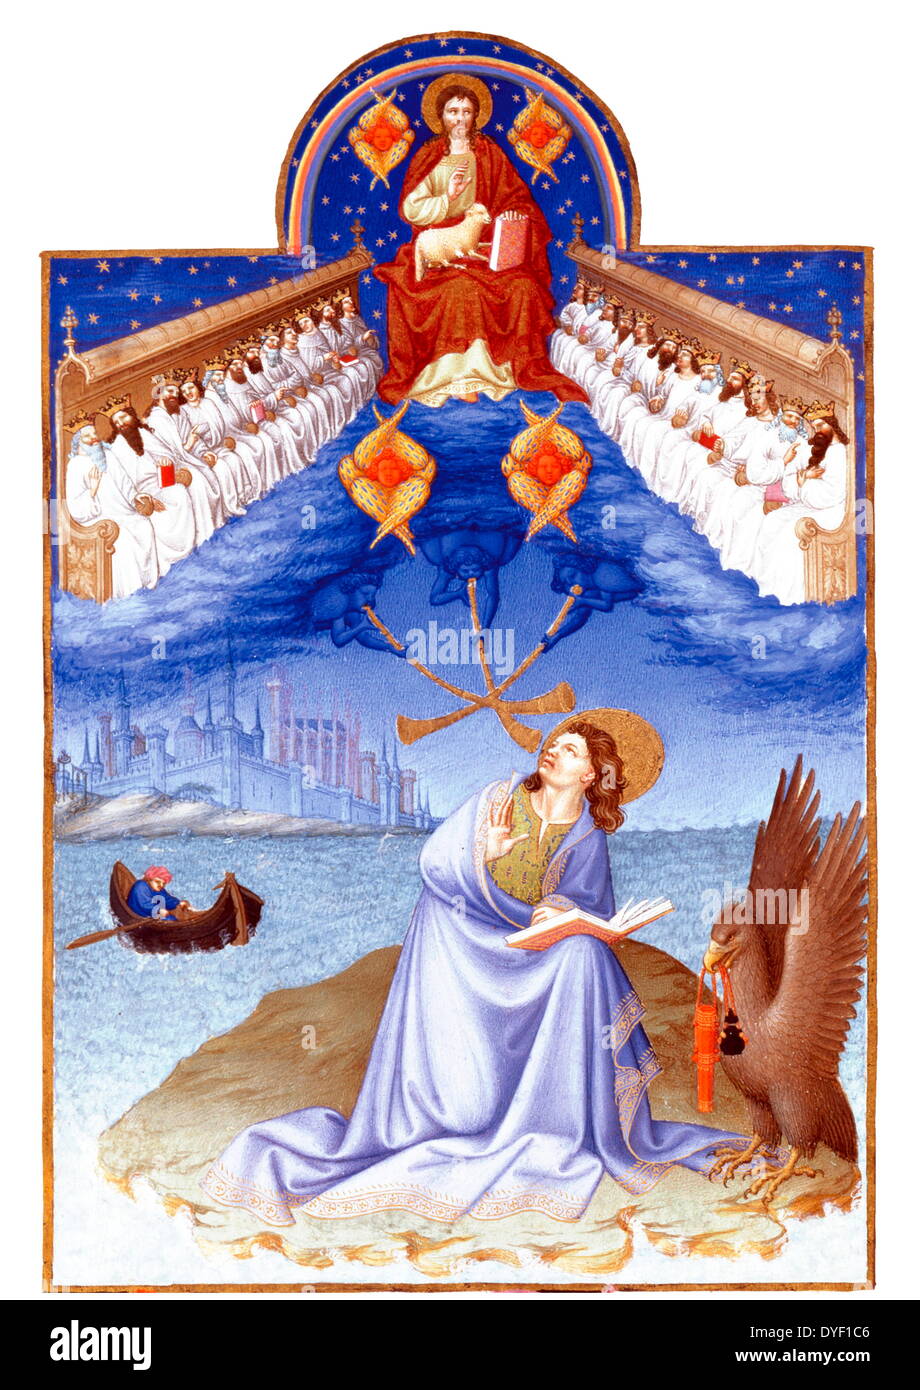 Christ and 24 Elders with John (Très Riches Heures). Masterpiece of Gothic illumination by the Limbourg brothers, 3 Dutch brothers working in Paris. One of  twelve calendar illustrations that make up its most famous pages. Circa early 15th century. Stock Photo